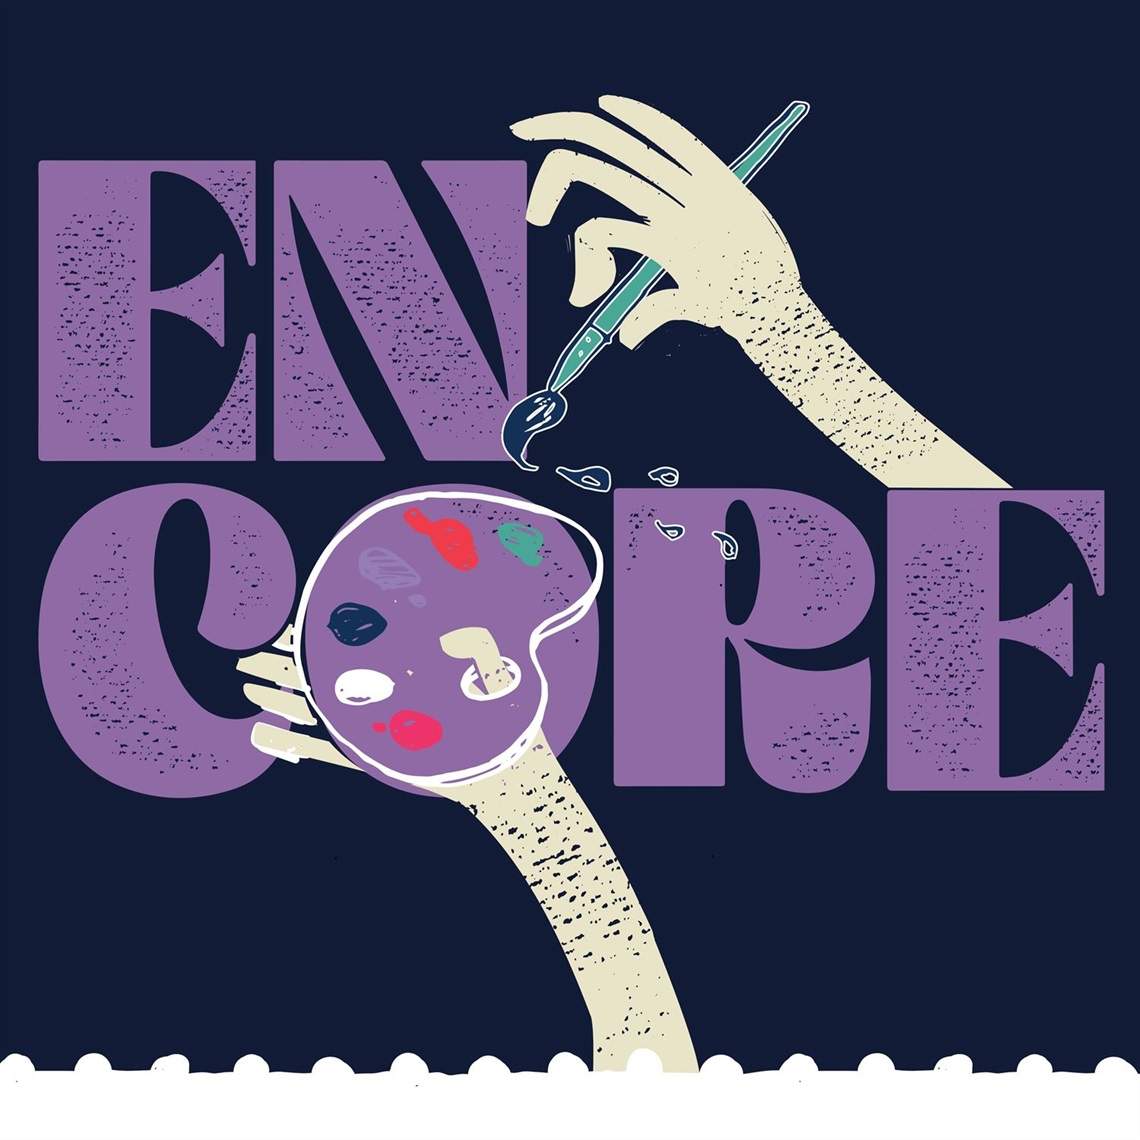 The Encore logo in purple text with a navy blue background featuring a hand with a paintbrush and a paint-filled palette.